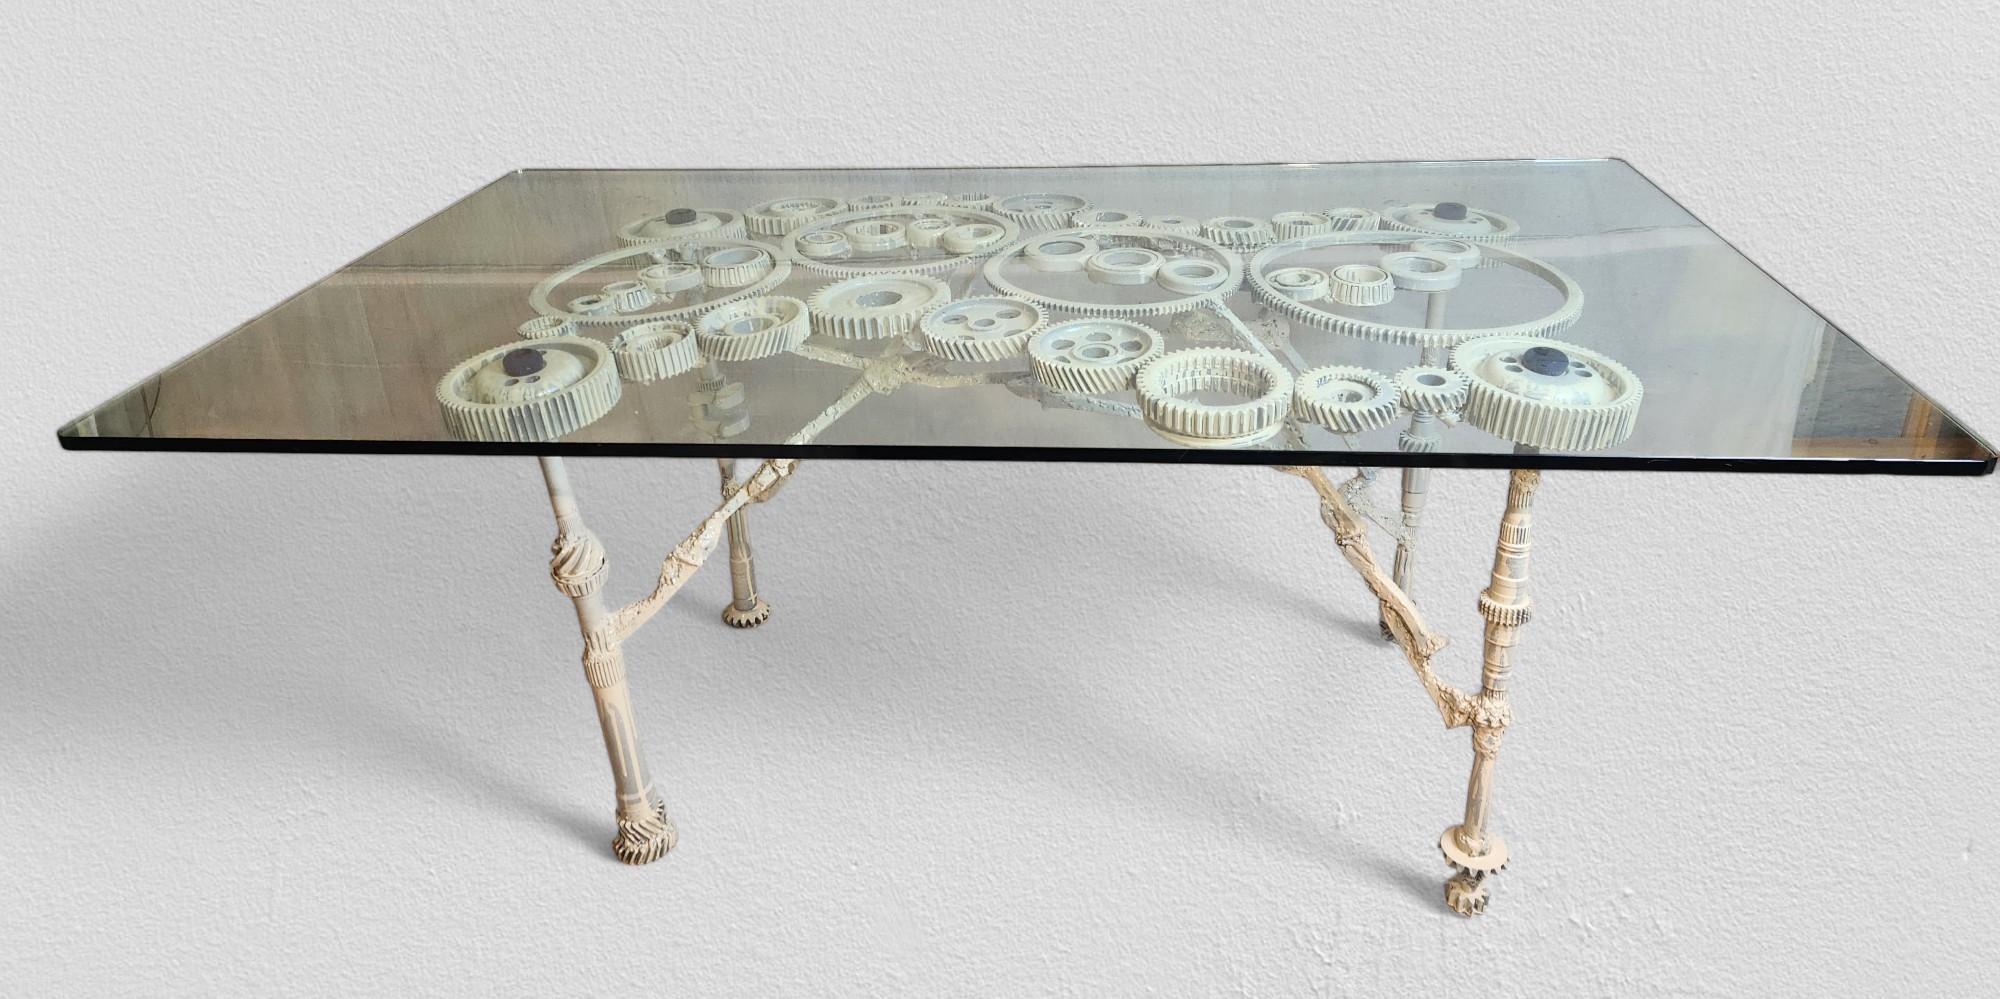 A studio crafted table created in the 1970s from an interesting and unique selection of cast iron gears, sprockets, and various splined drive shafts artistically coupled with a cross stretcher of slag welded spikes attributed to the American